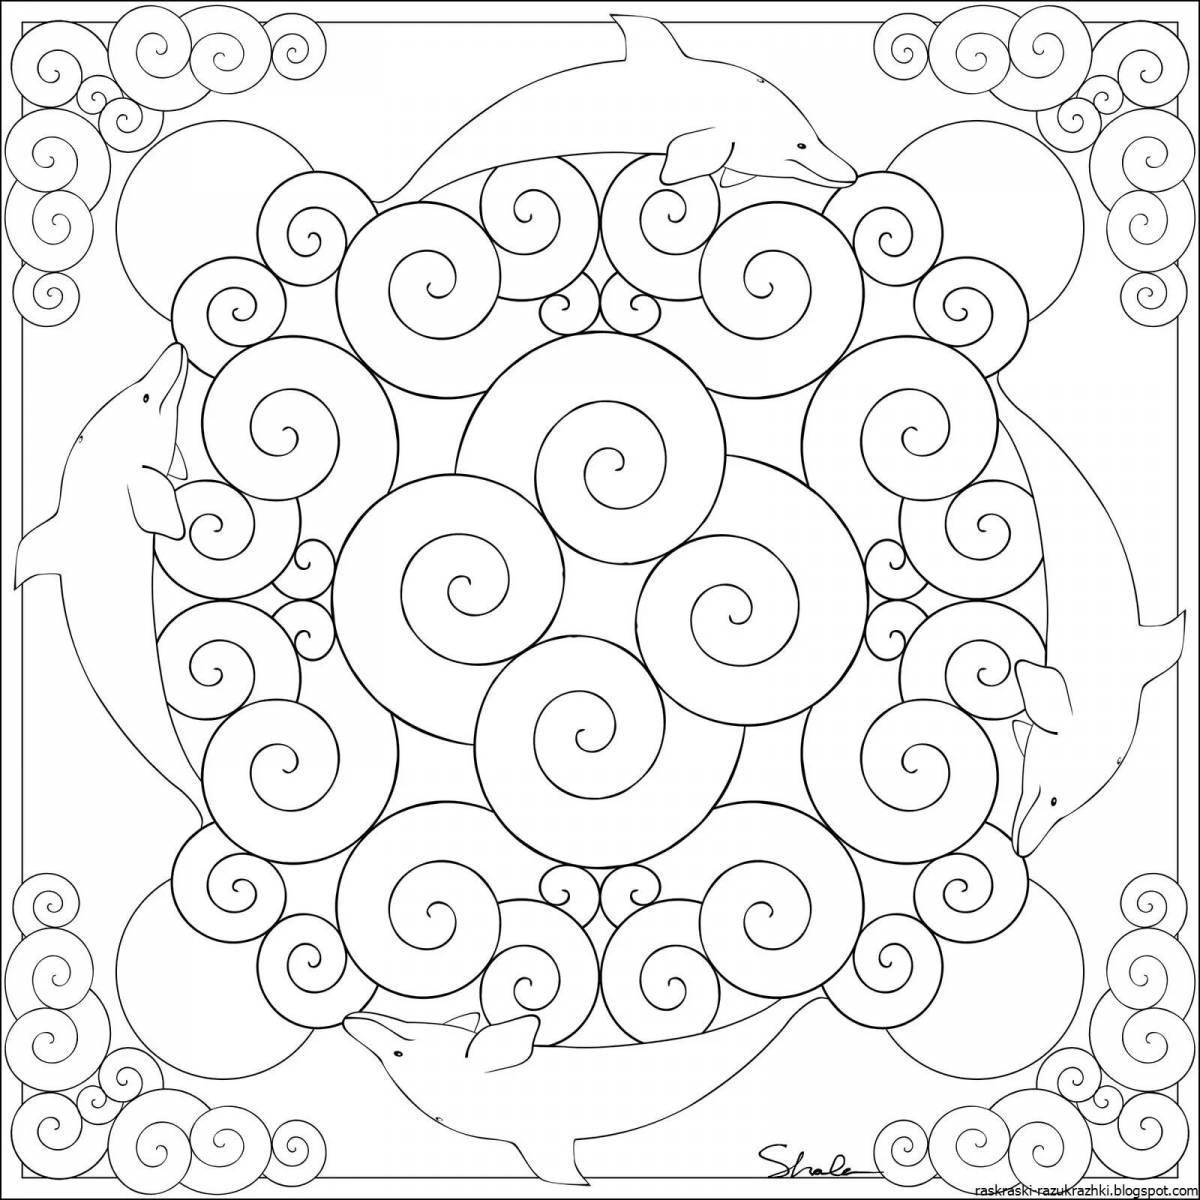 Awesome scarf coloring pages for kids